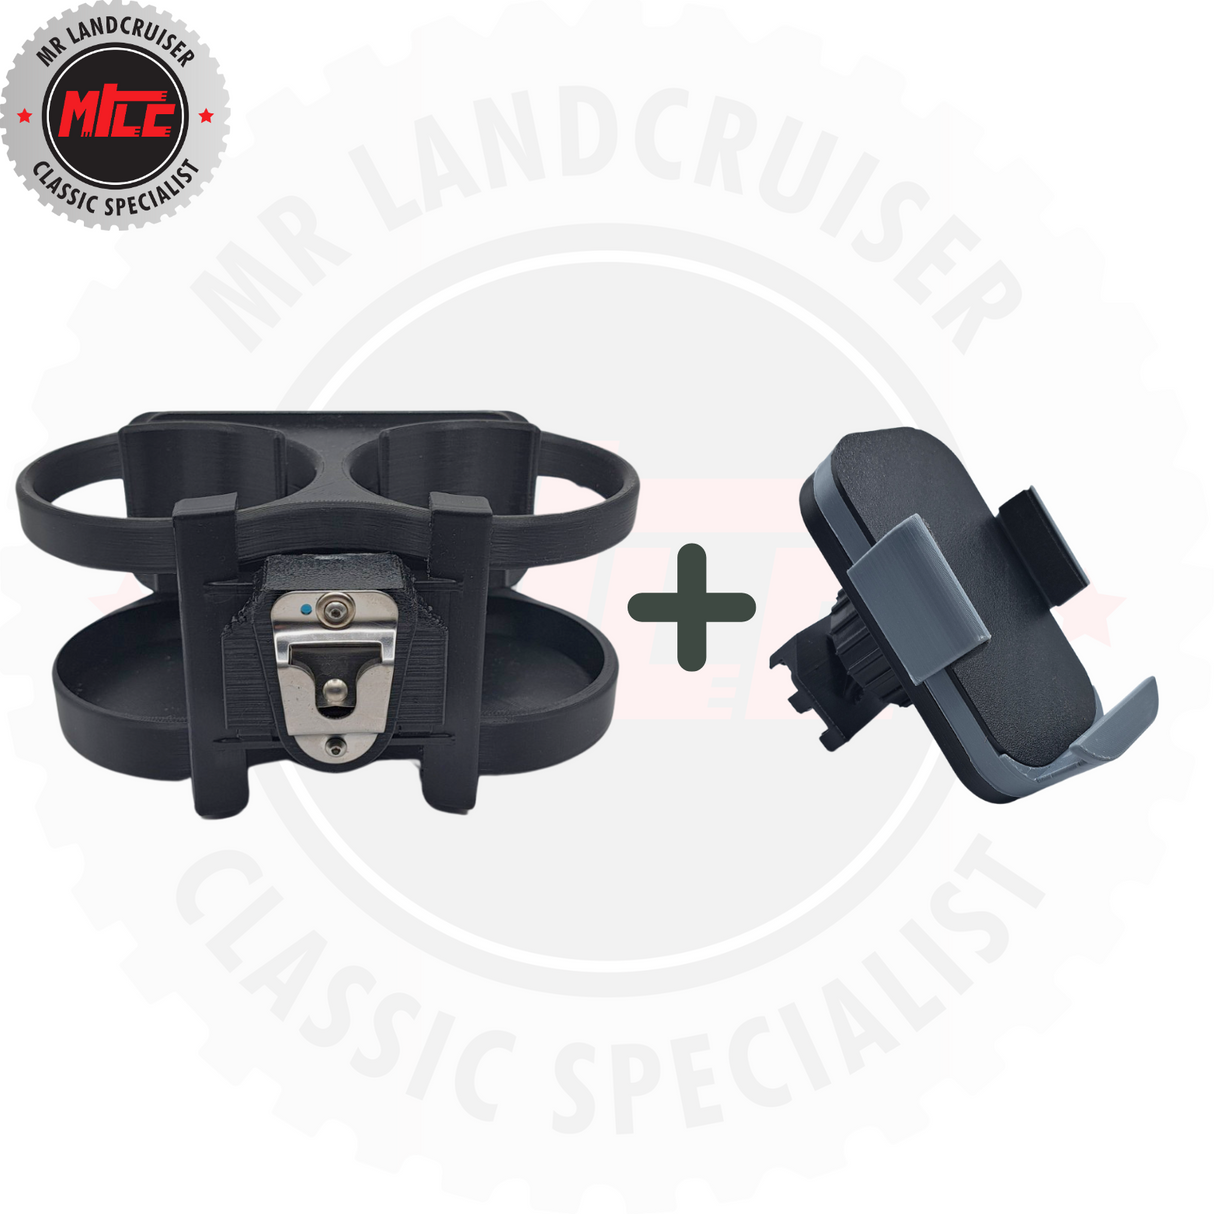 40 series toyota landcruiser cup holder and phone holder